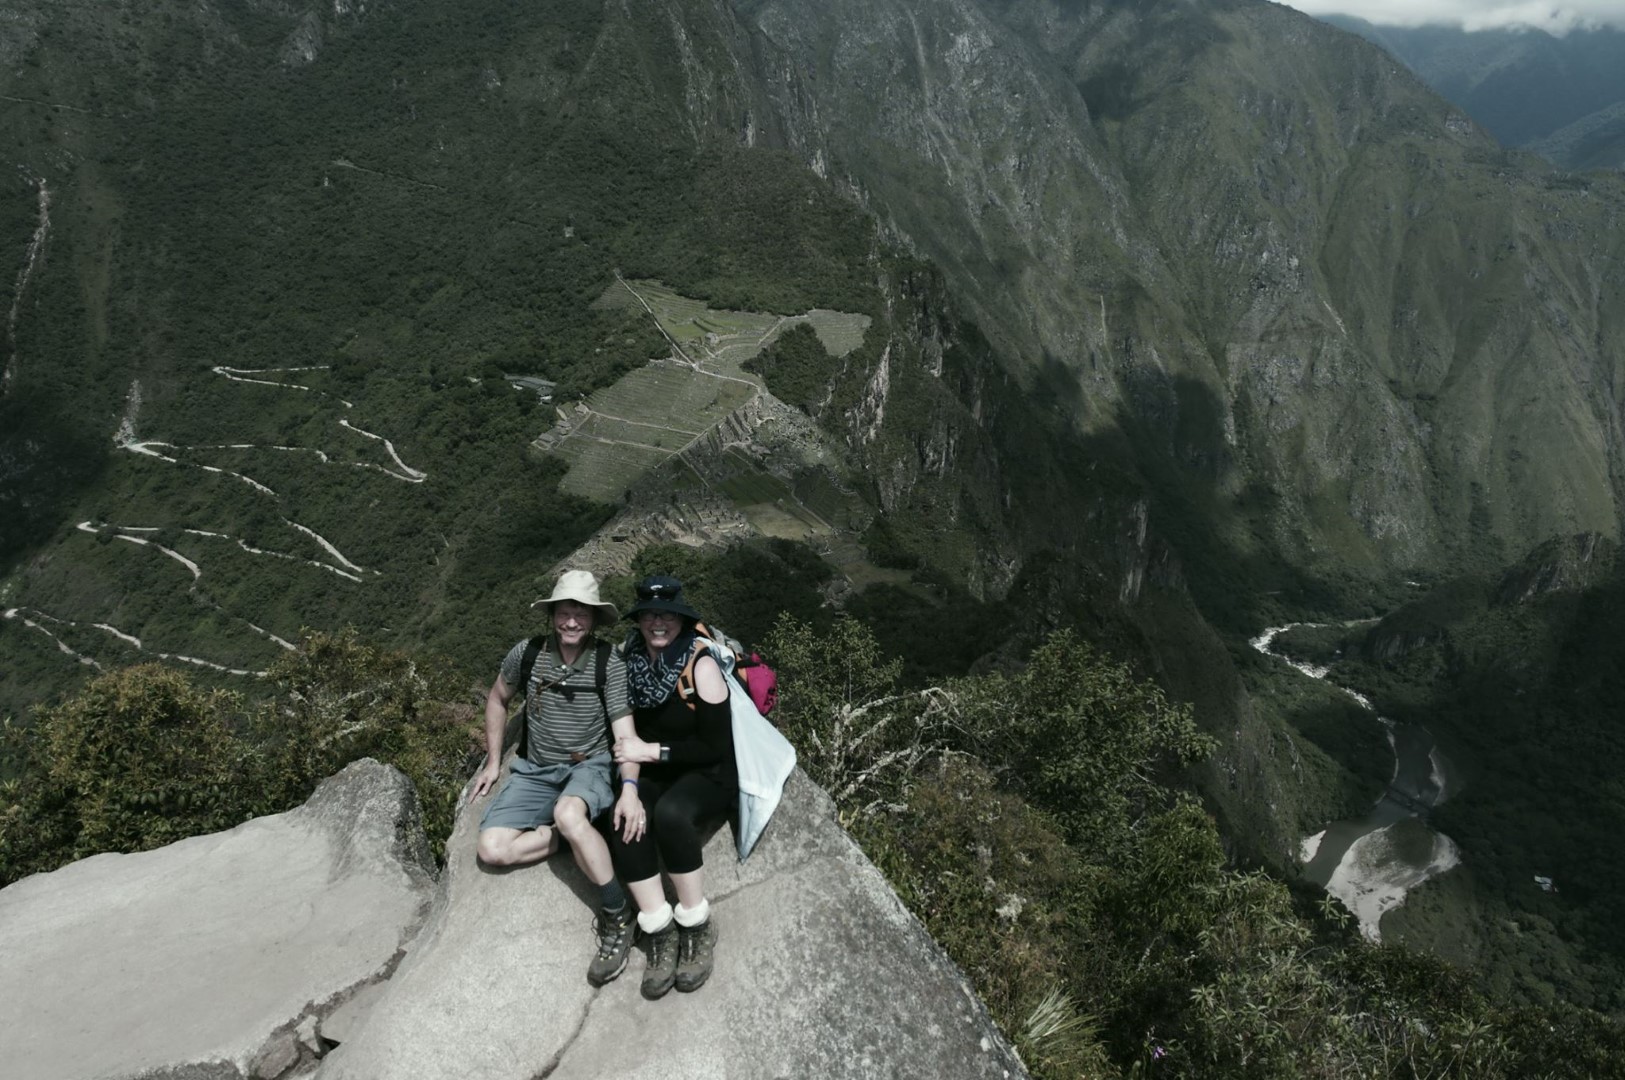 07 - Atop Huayna Picchu with Machu Picchu in the background.jpg